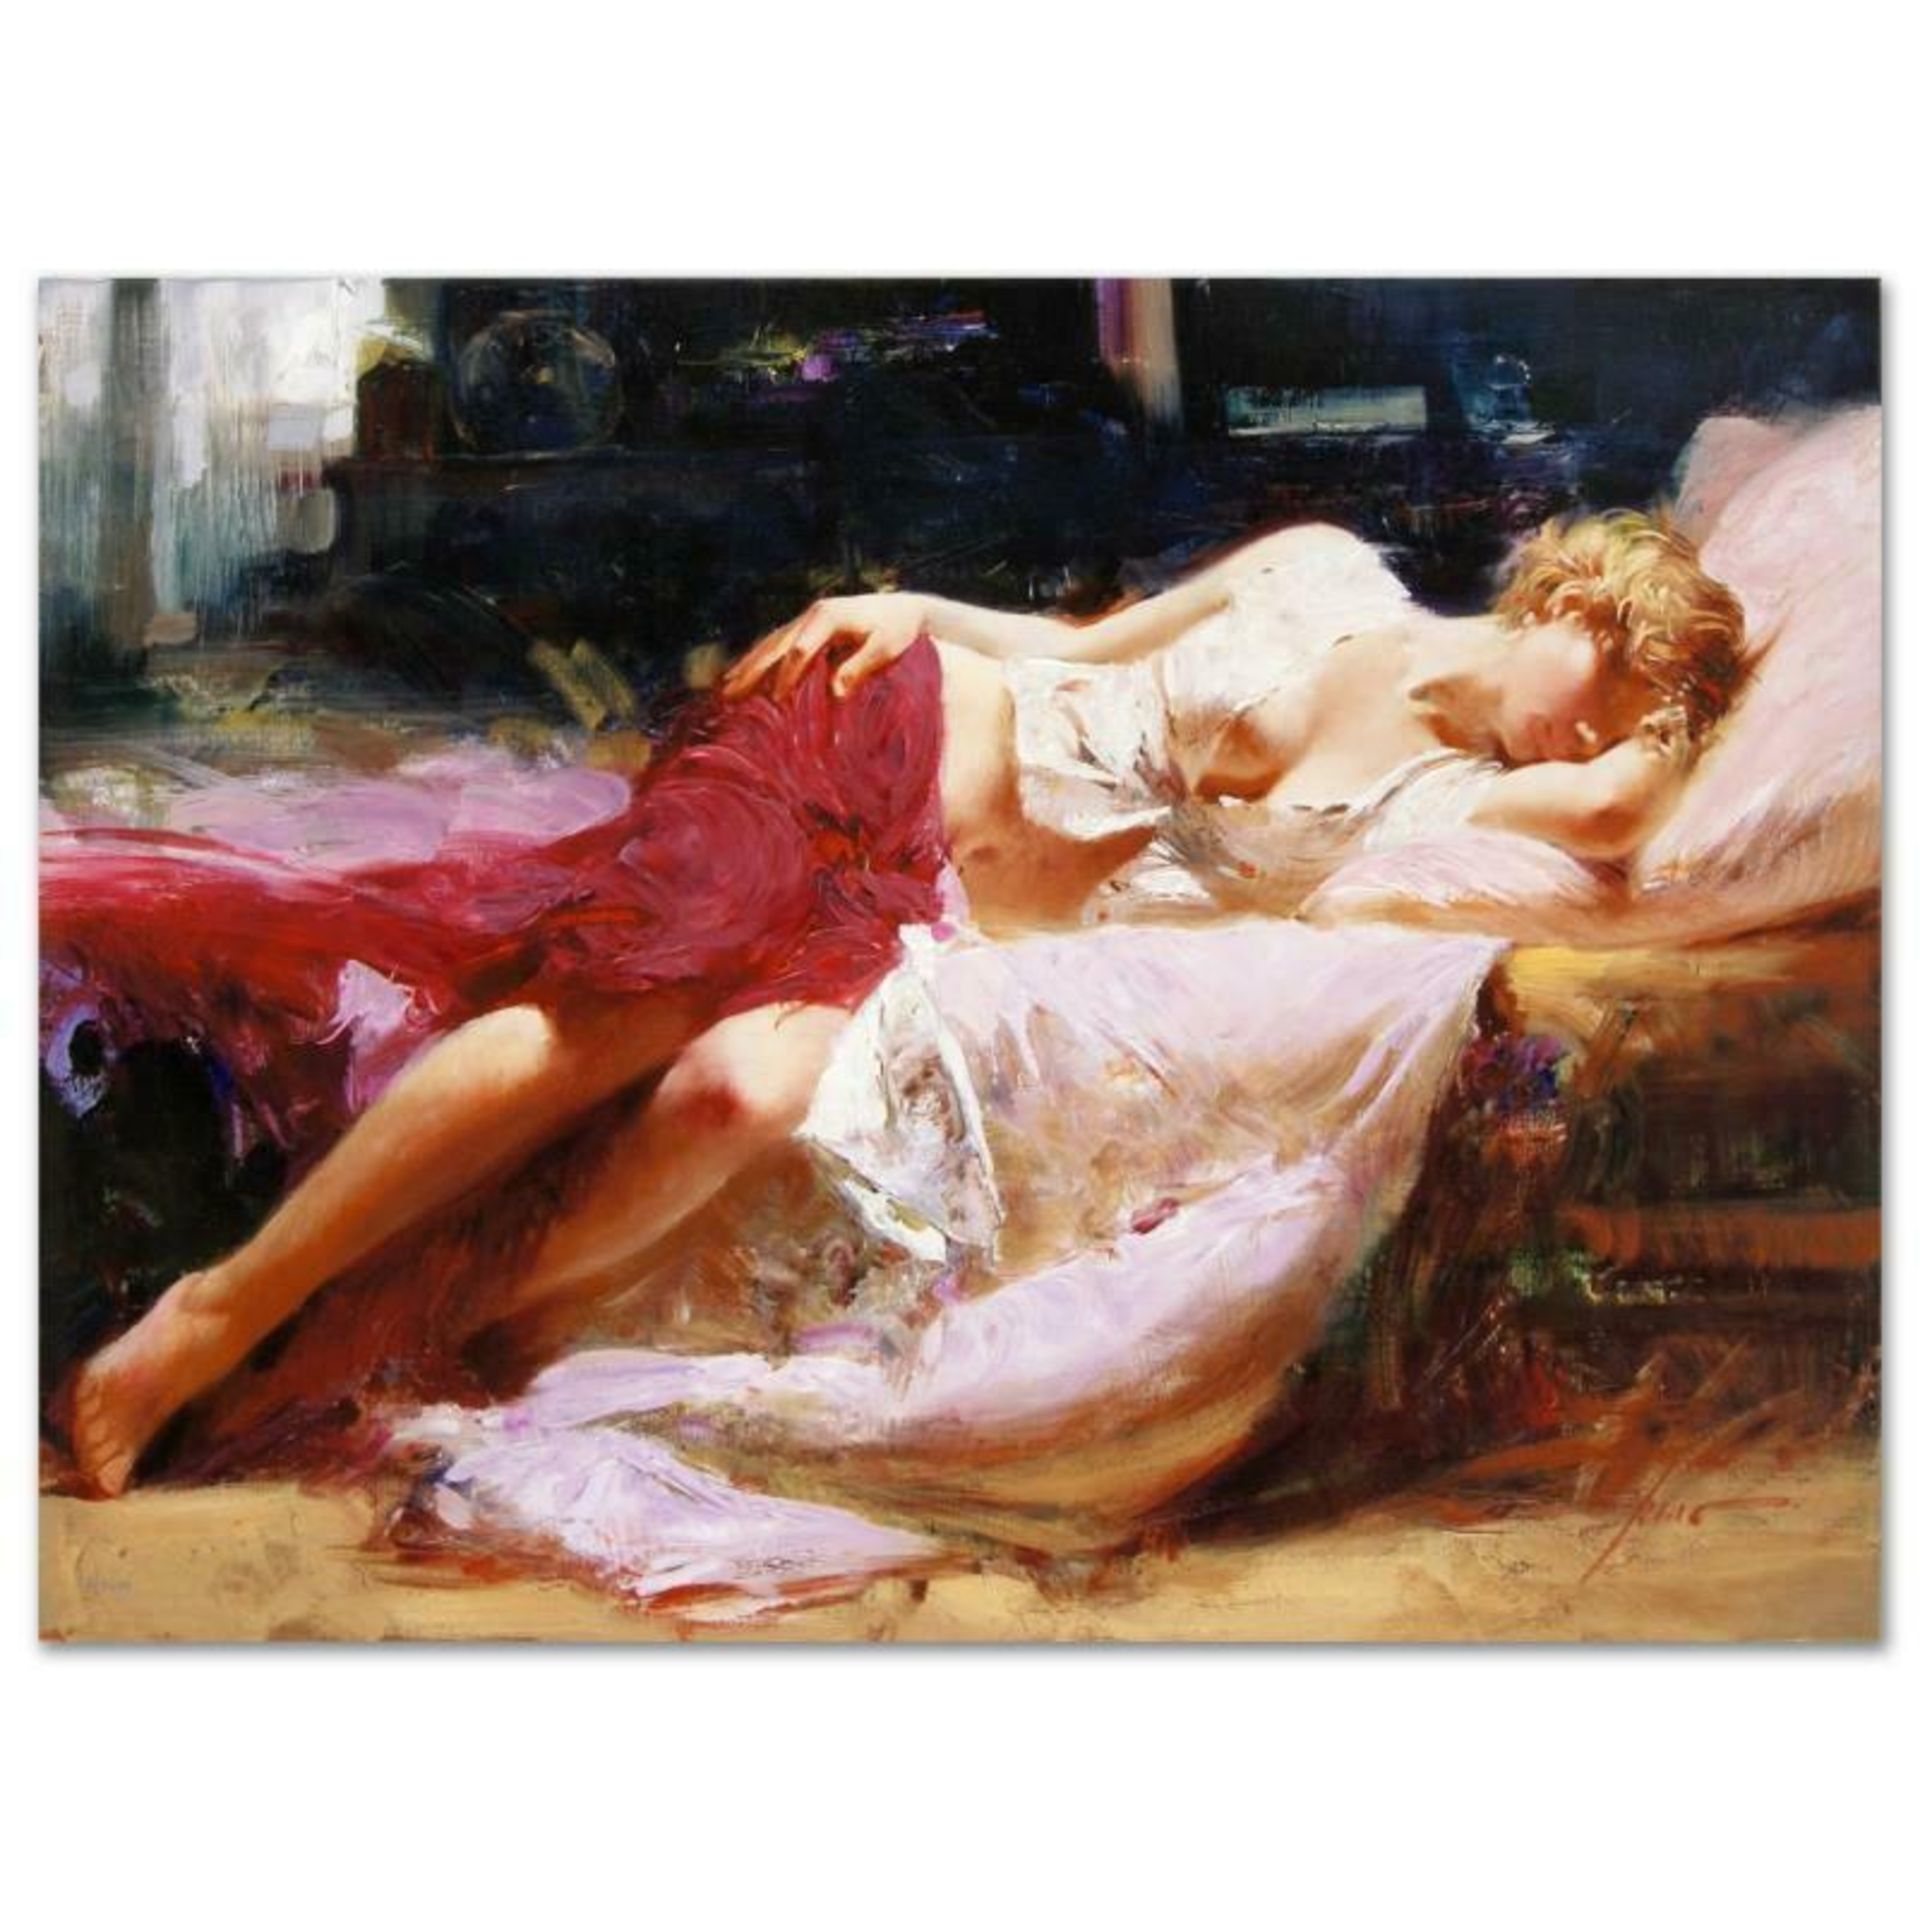 Pino (1939-2010), "Dreaming in Color" Artist Embellished Limited Edition on Canv